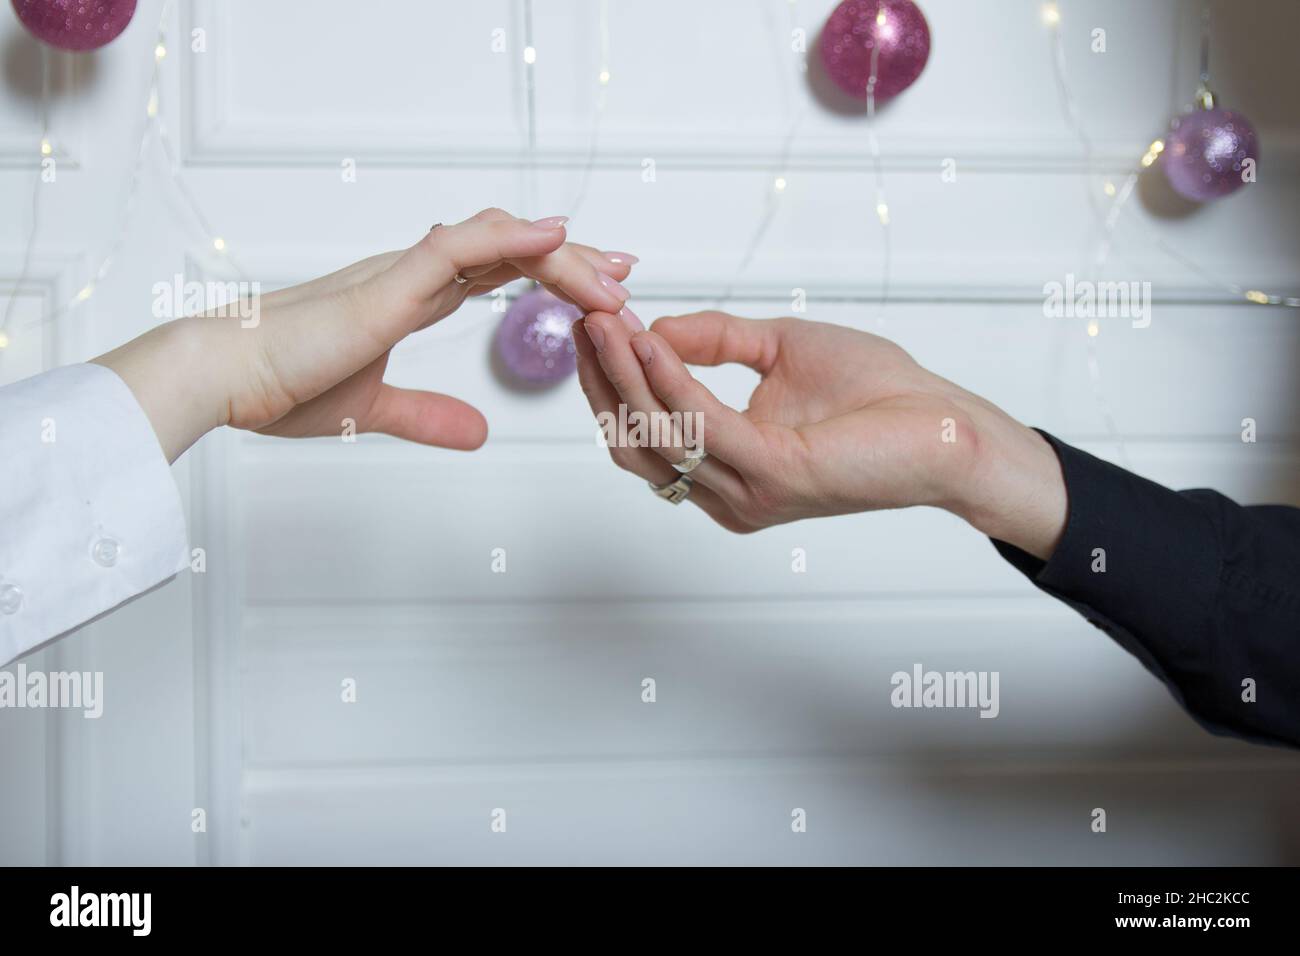 Couples holding hands.a man's hand touches a woman's hand Stock Photo